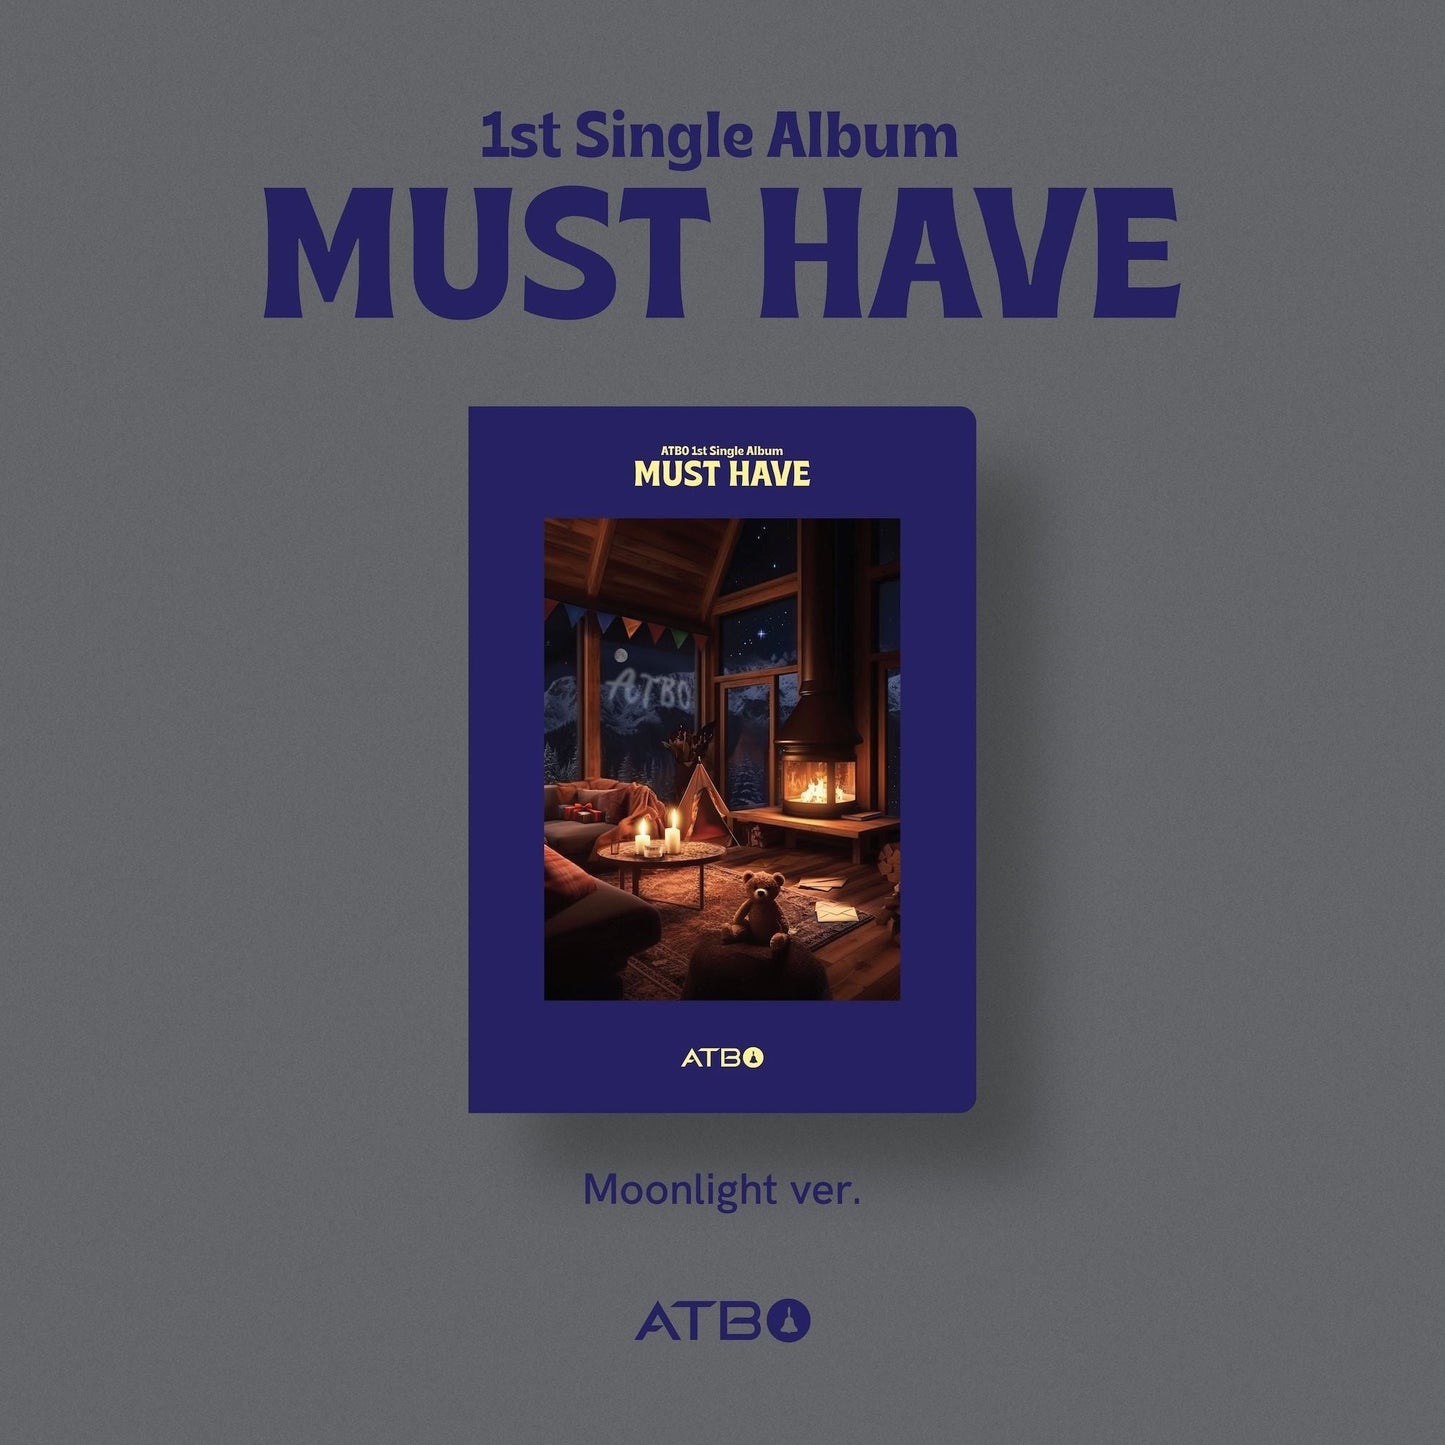 ATBO 1ST SINGLE ALBUM 'MUST HAVE' MOONLIGHT VERSION COVER